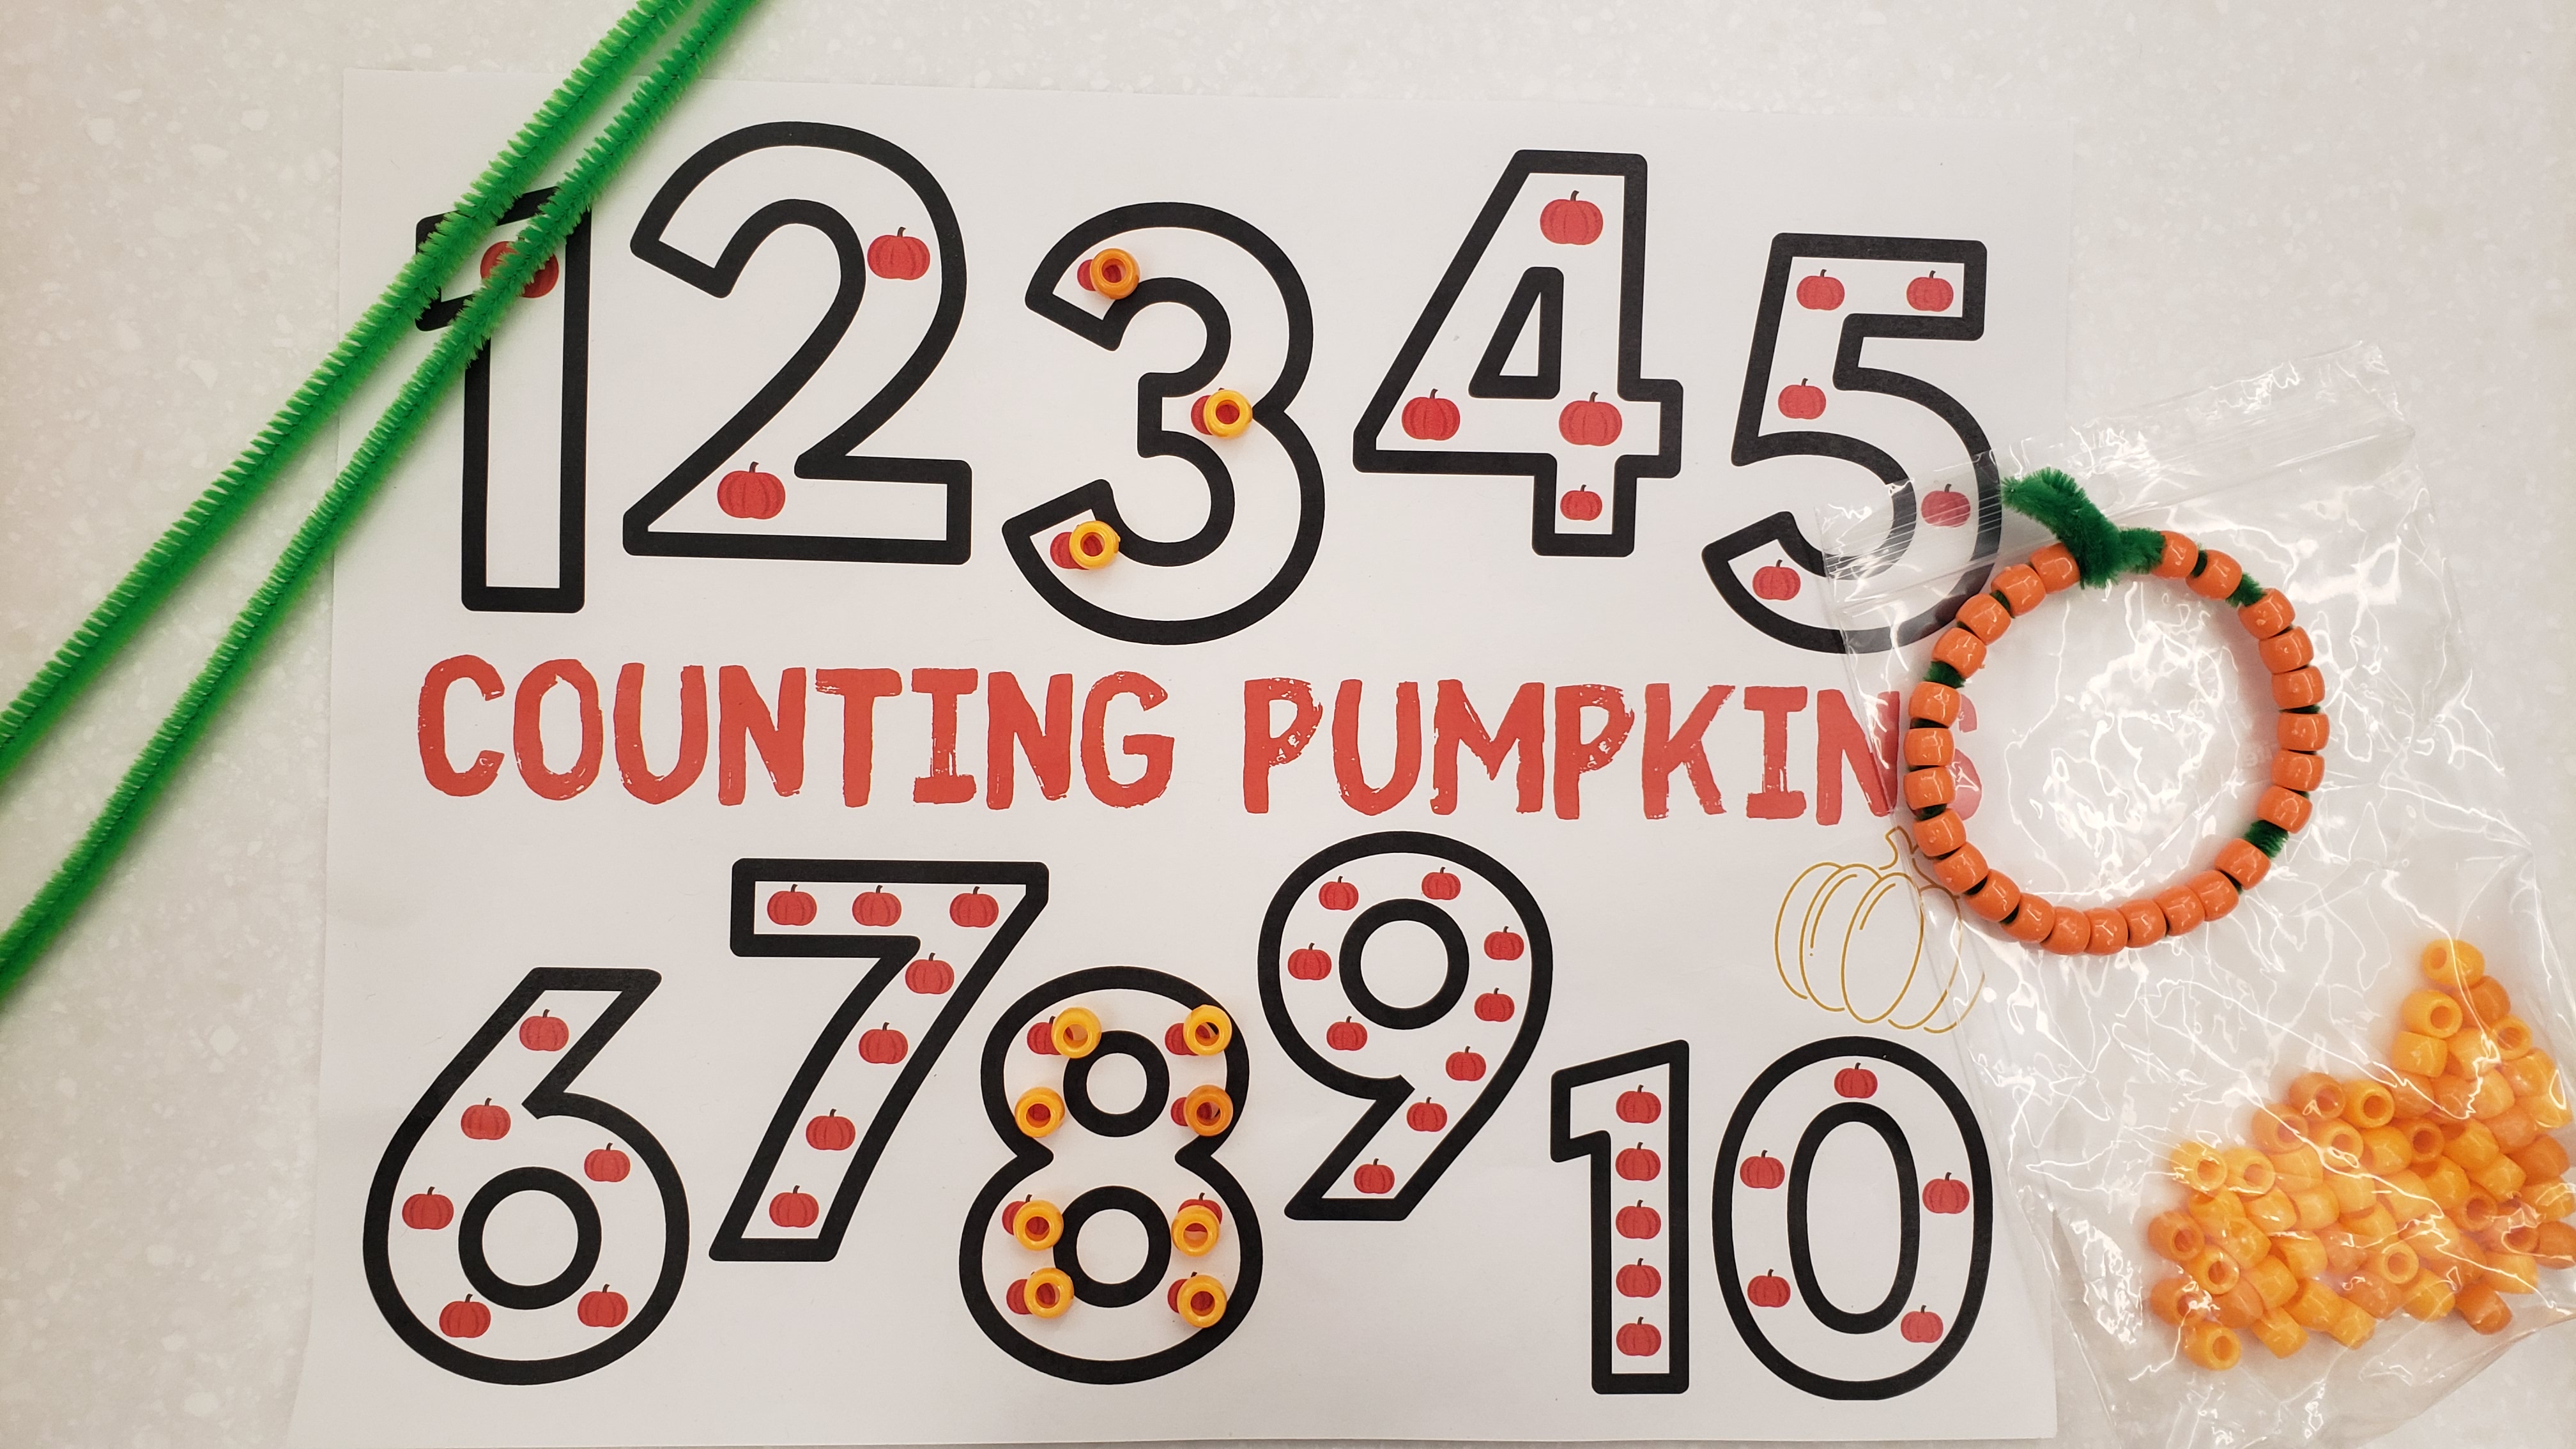 Pumpkin Counting text and orange pony bead counters in number outlines